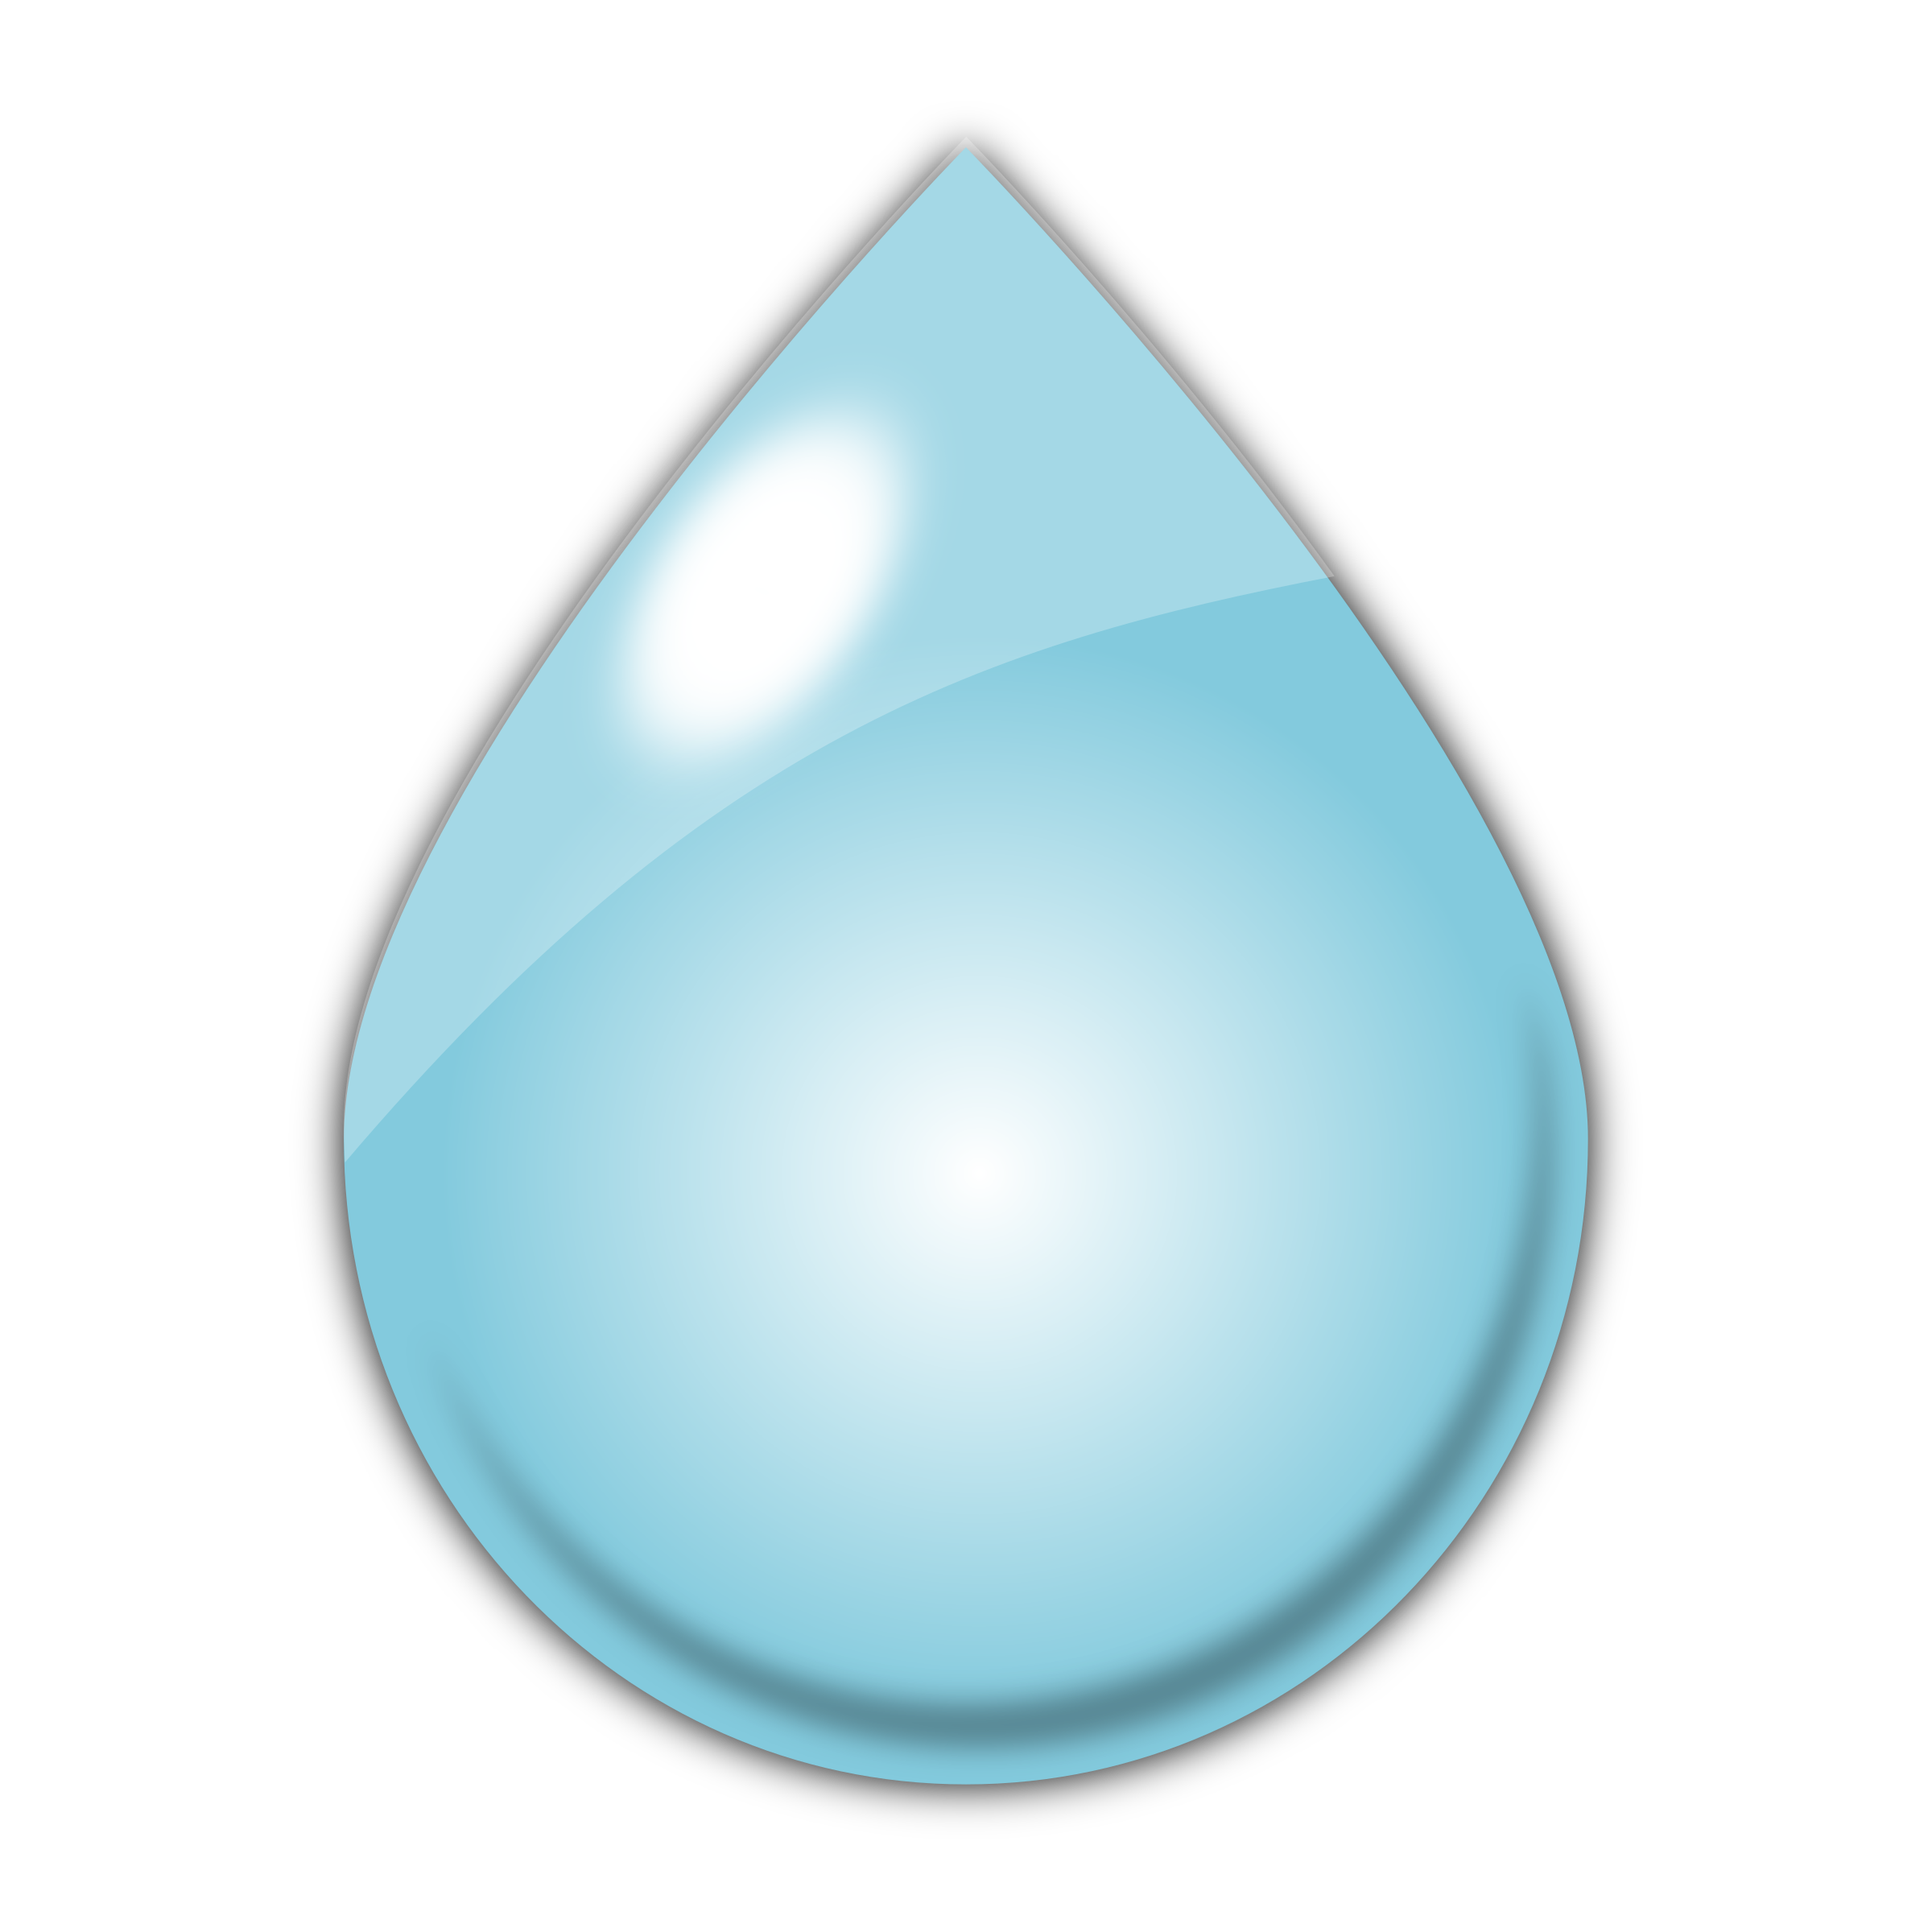 Drawings of raindrops clipart